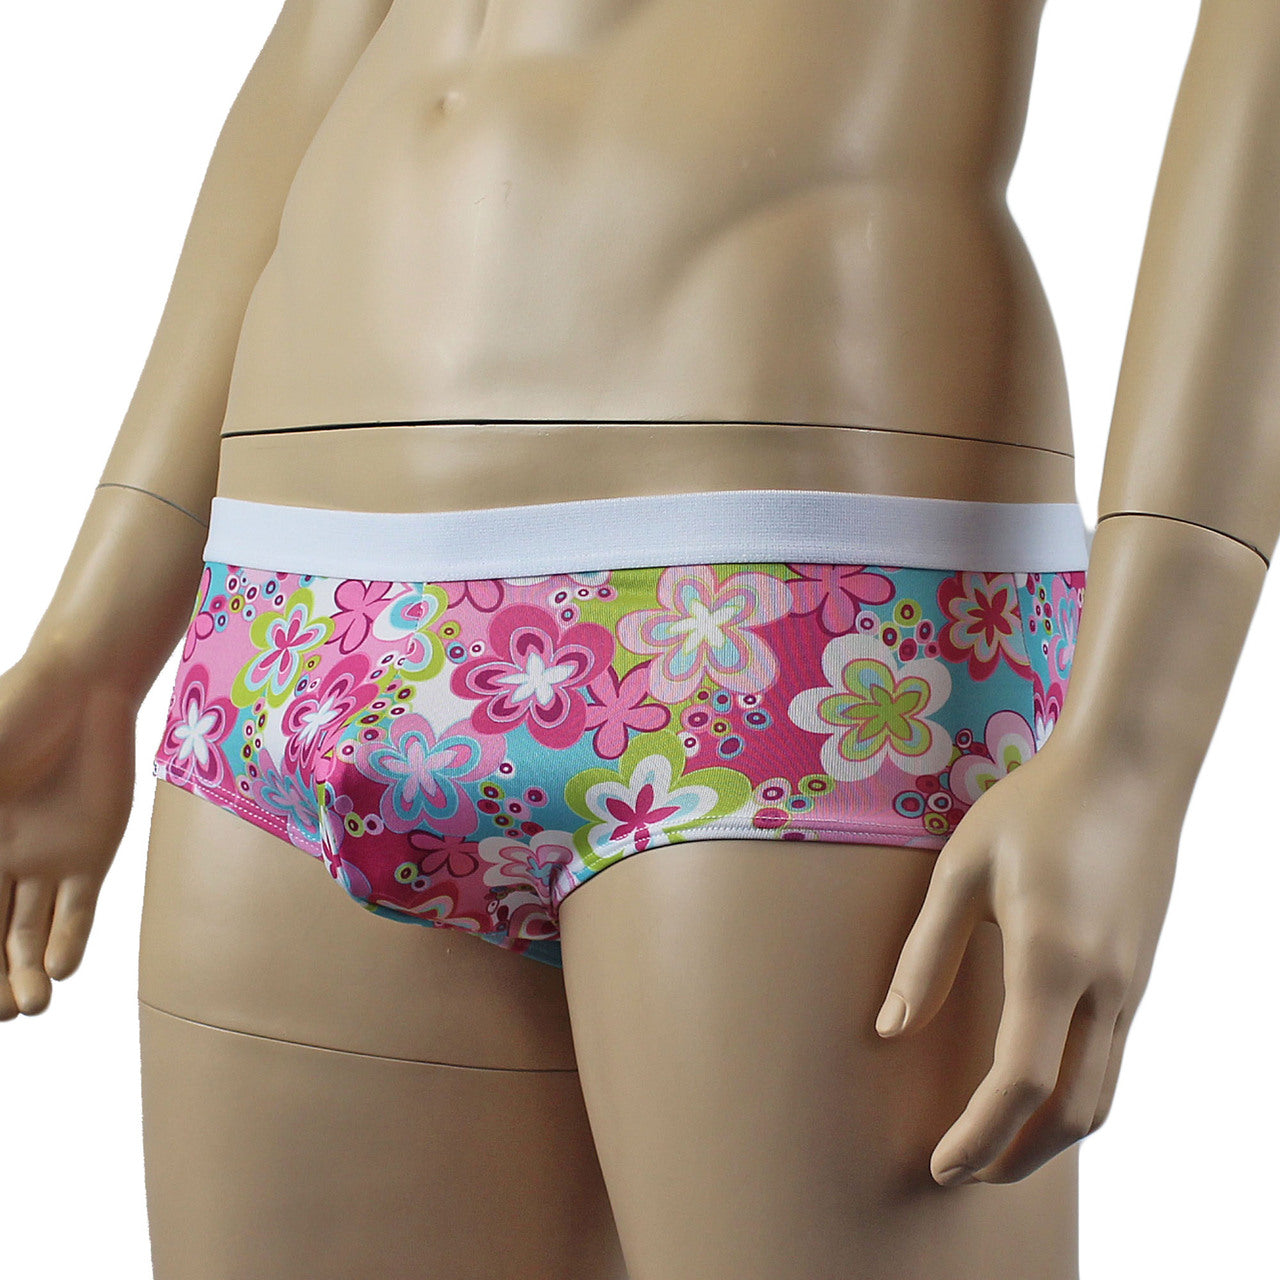 Male Hippie Flower Print Boxer Briefs with Band